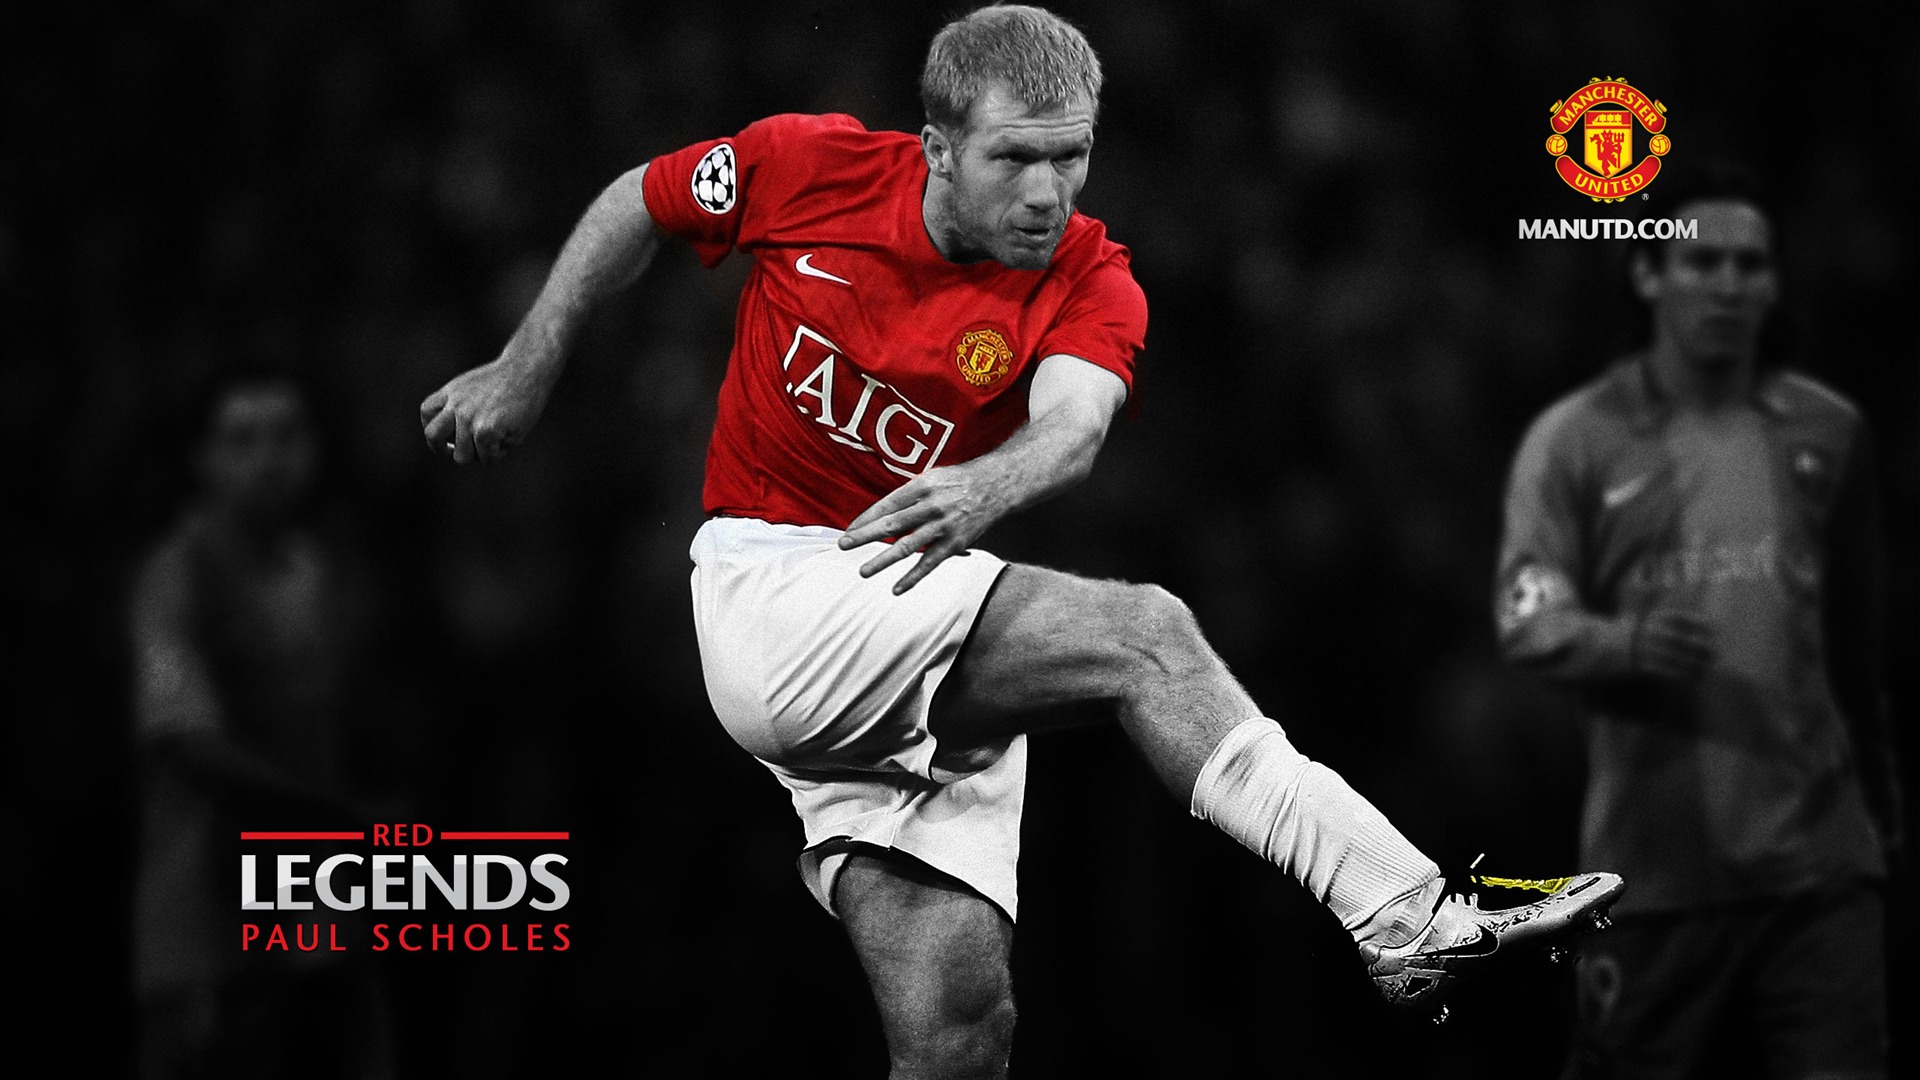 Free download Red Legends Manchester United wallpaper 1920x1080 wallpaper download [1920x1080] for your Desktop, Mobile & Tablet. Explore Manchester United Wallpaper 1920x1080. Manchester United Wallpaper 2014 Manchester United